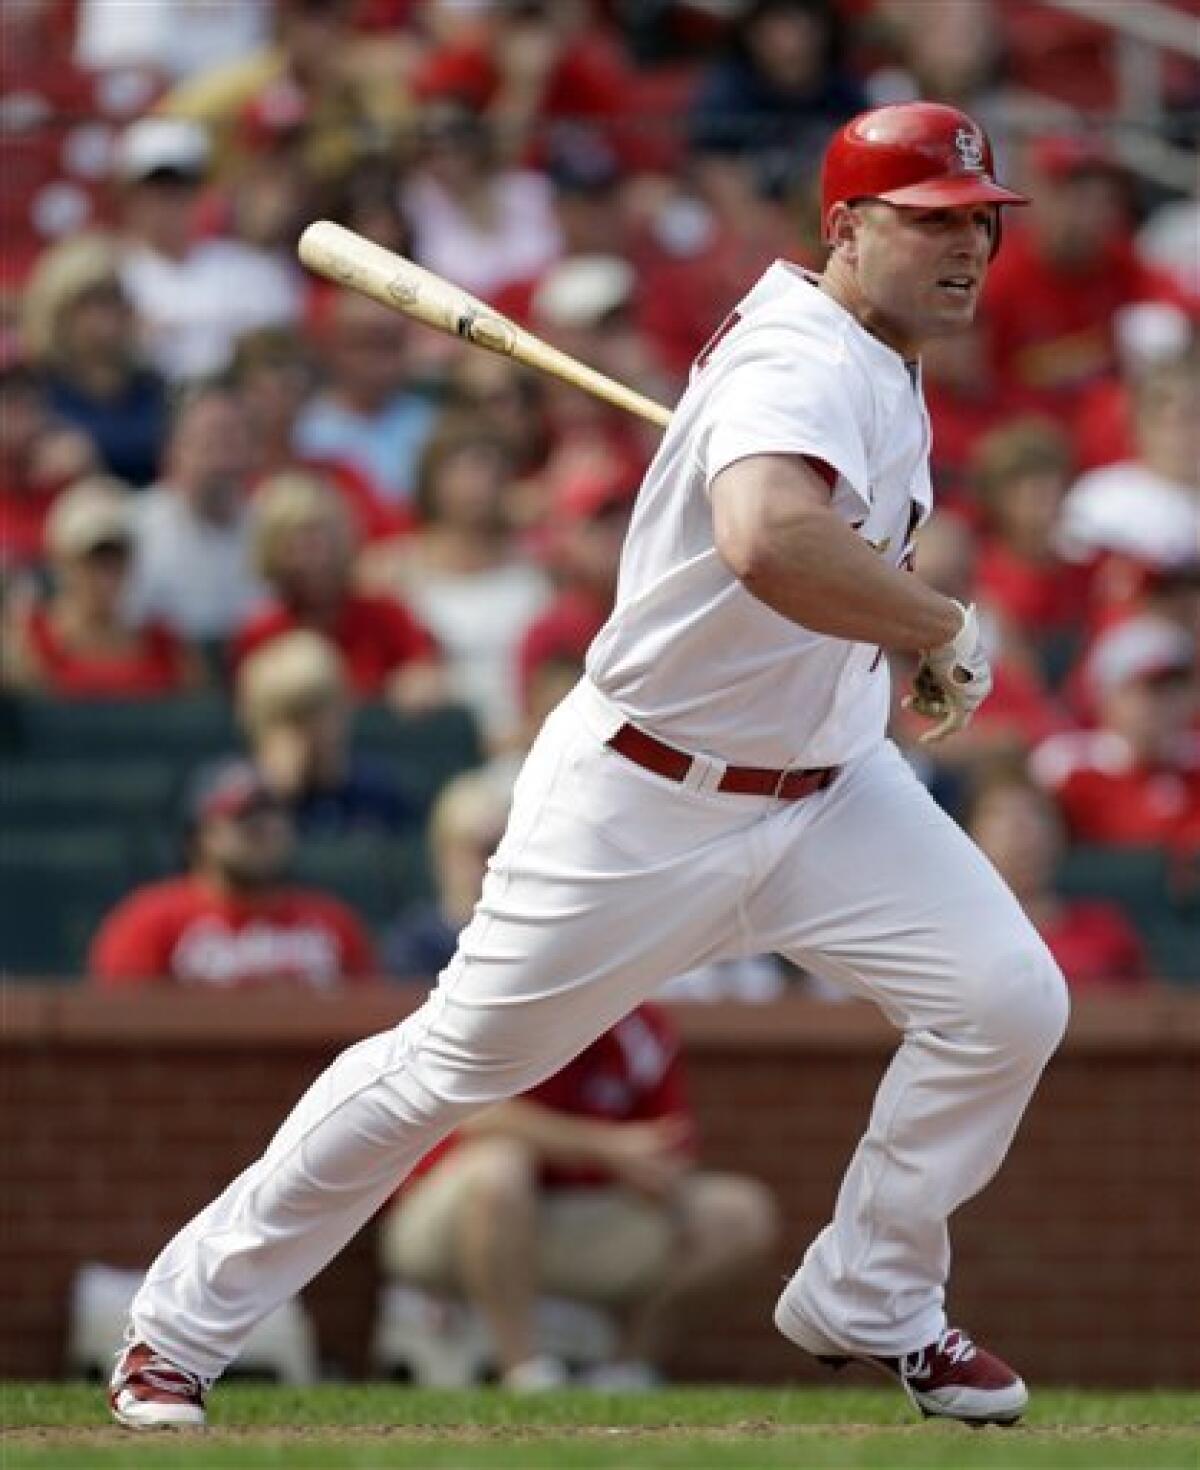 Yankees and Matt Holliday Said to Reach One-Year, $13 Million Deal